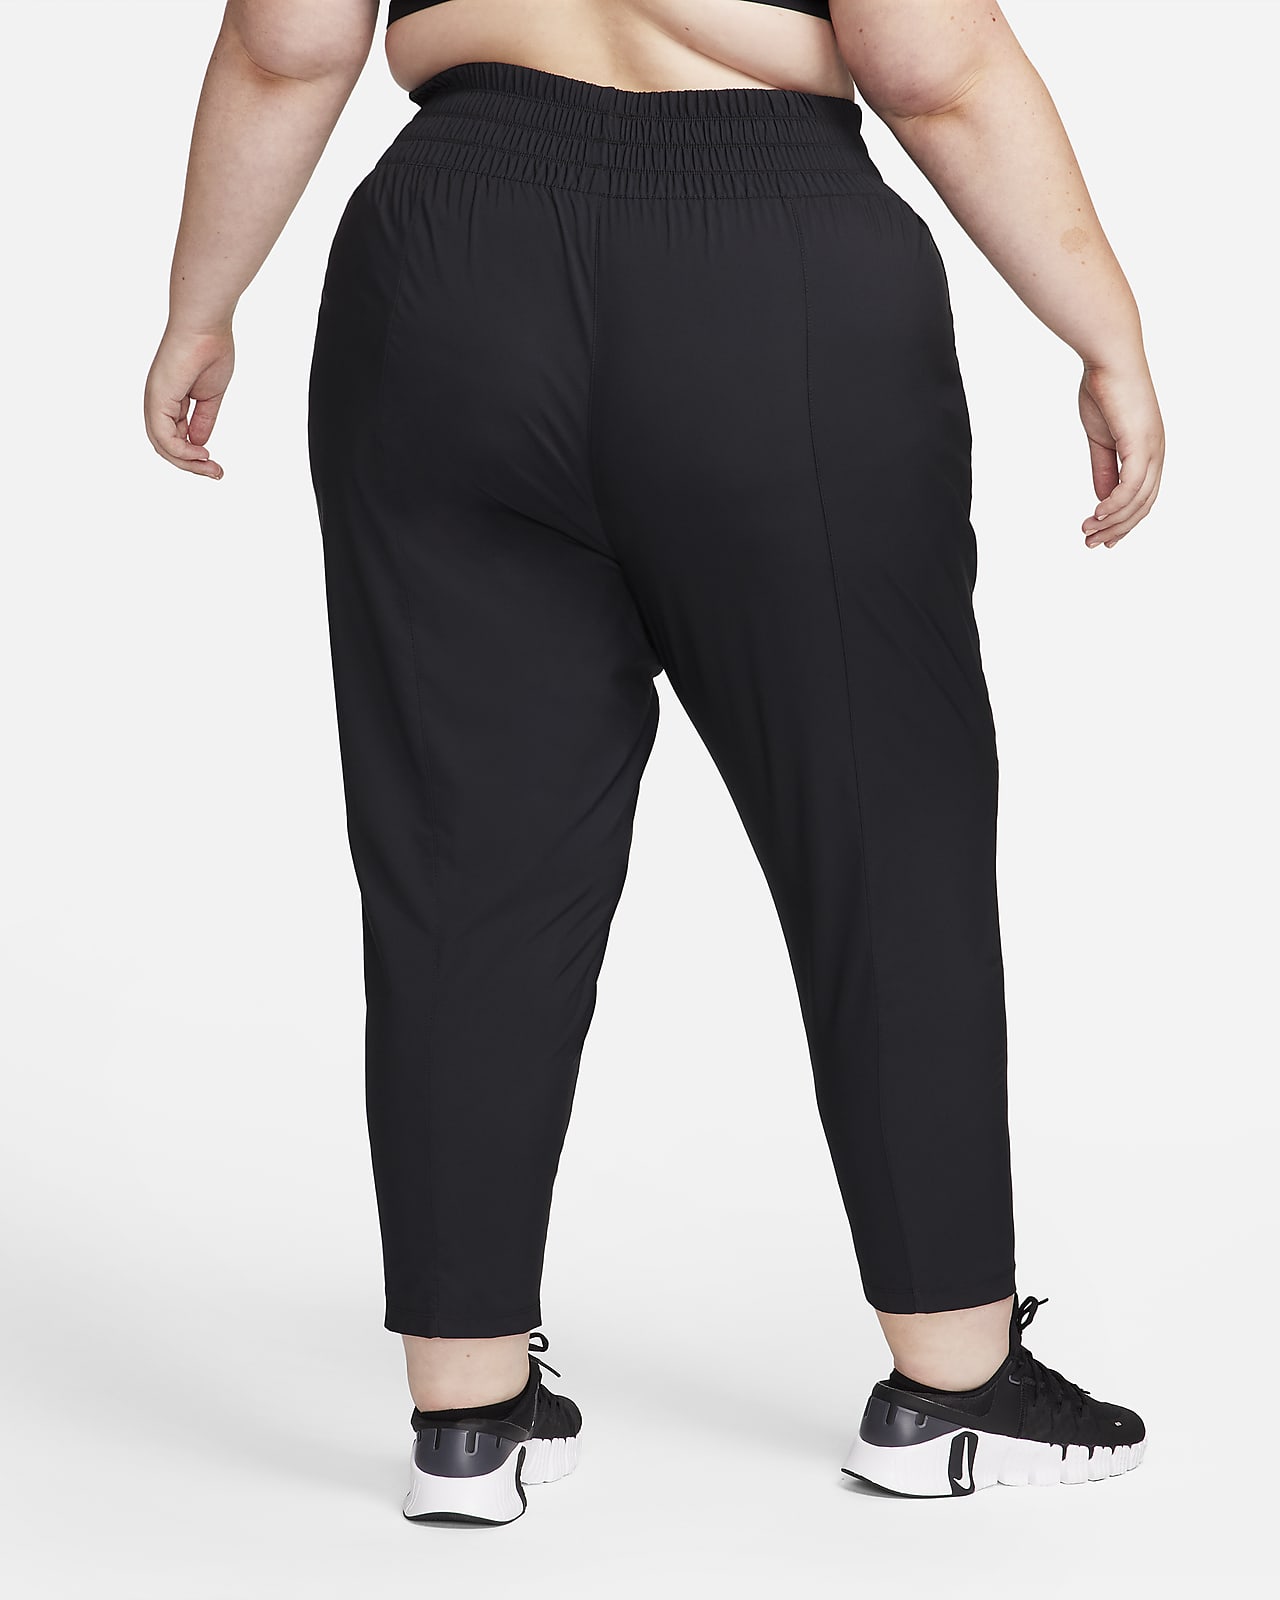 Womens Plus Size Clearance $5 Pants Fashion Women Summer Casual Loose  Cotton And Linen Pocket Solid Trousers Pants - Walmart.com